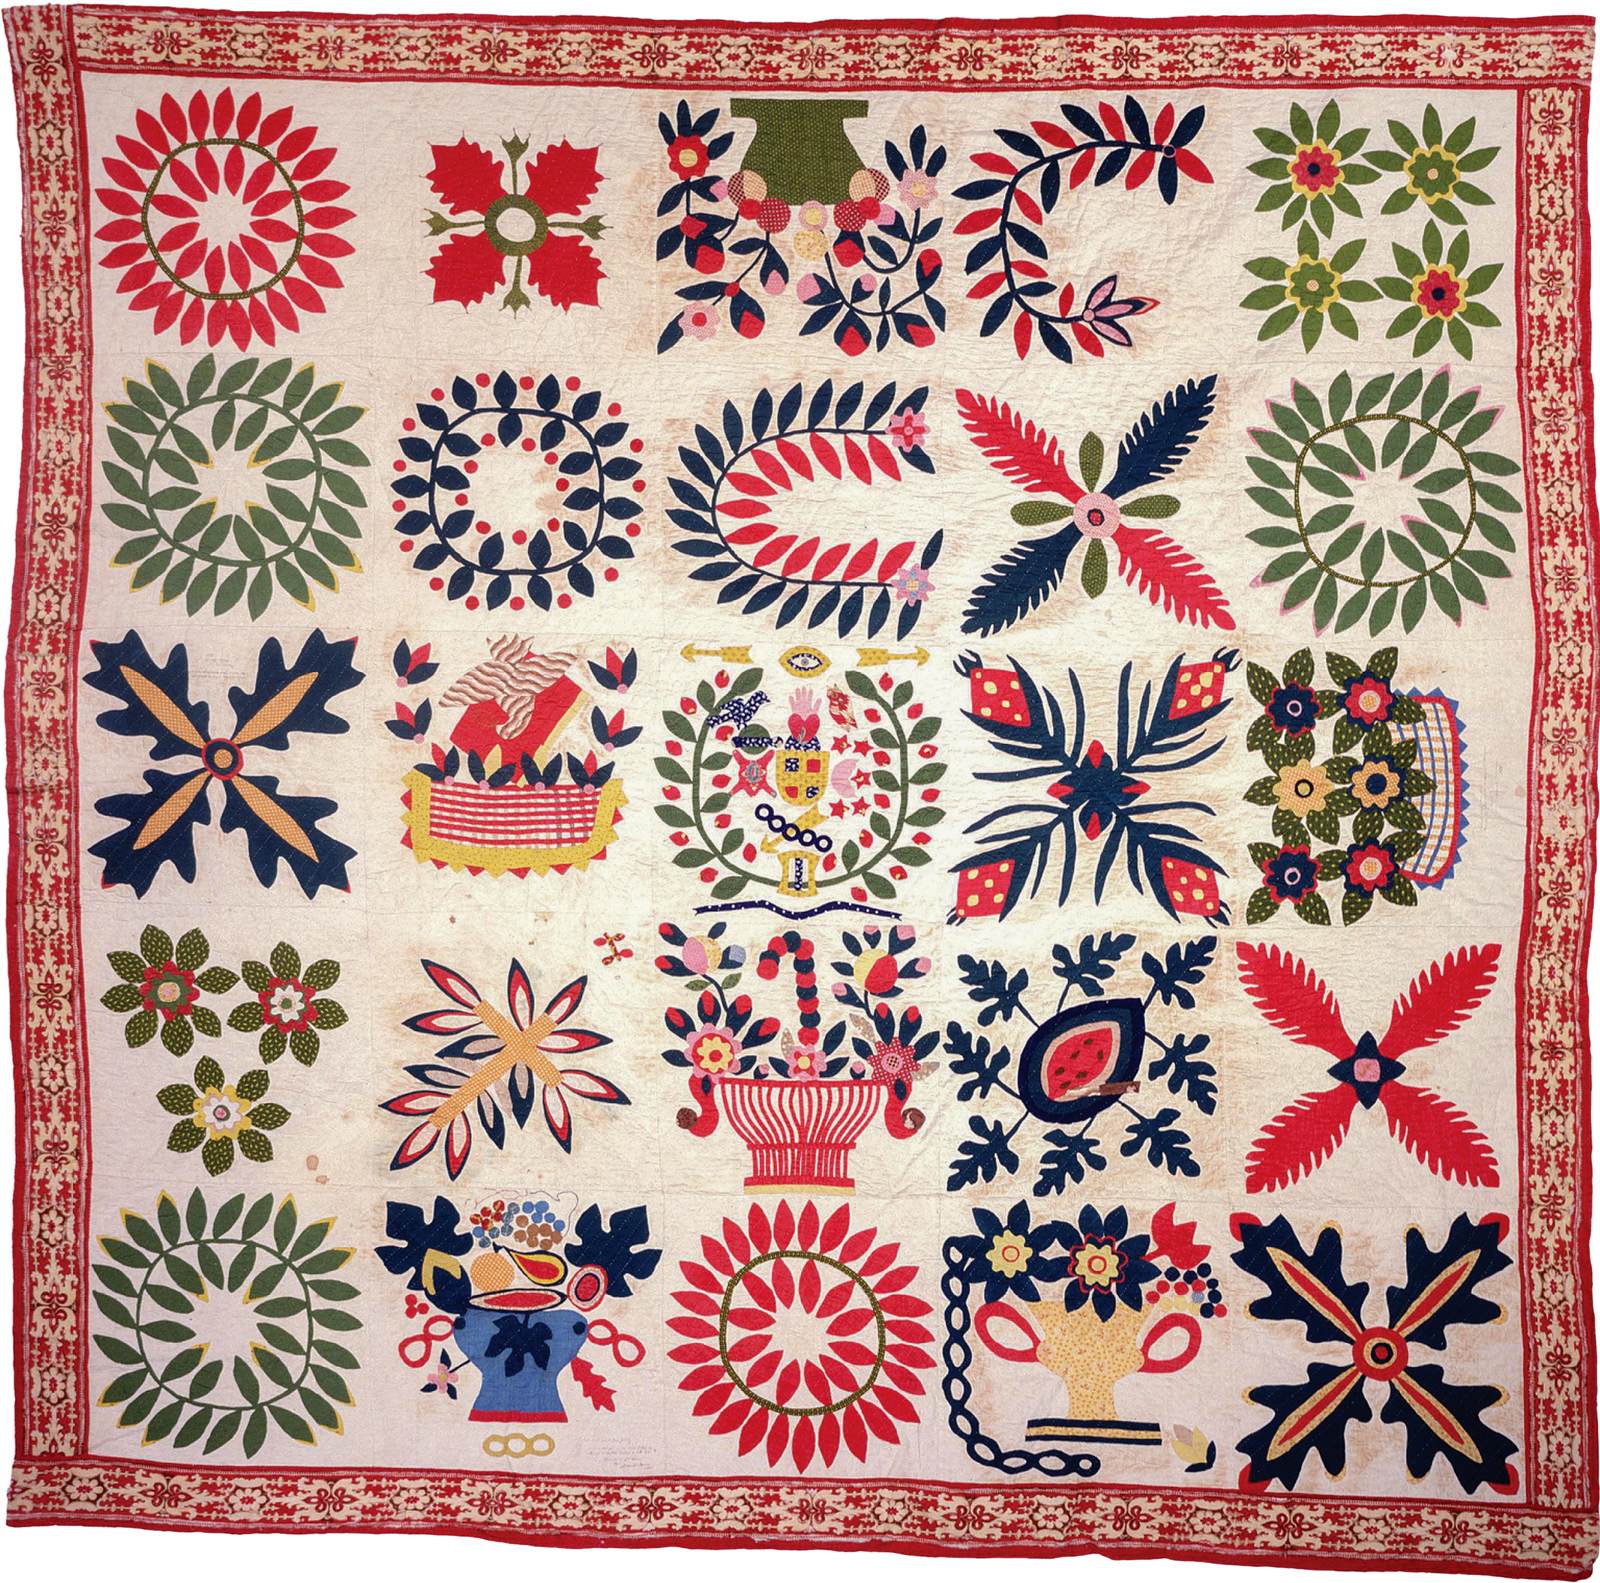 A cotton quilt from 1851